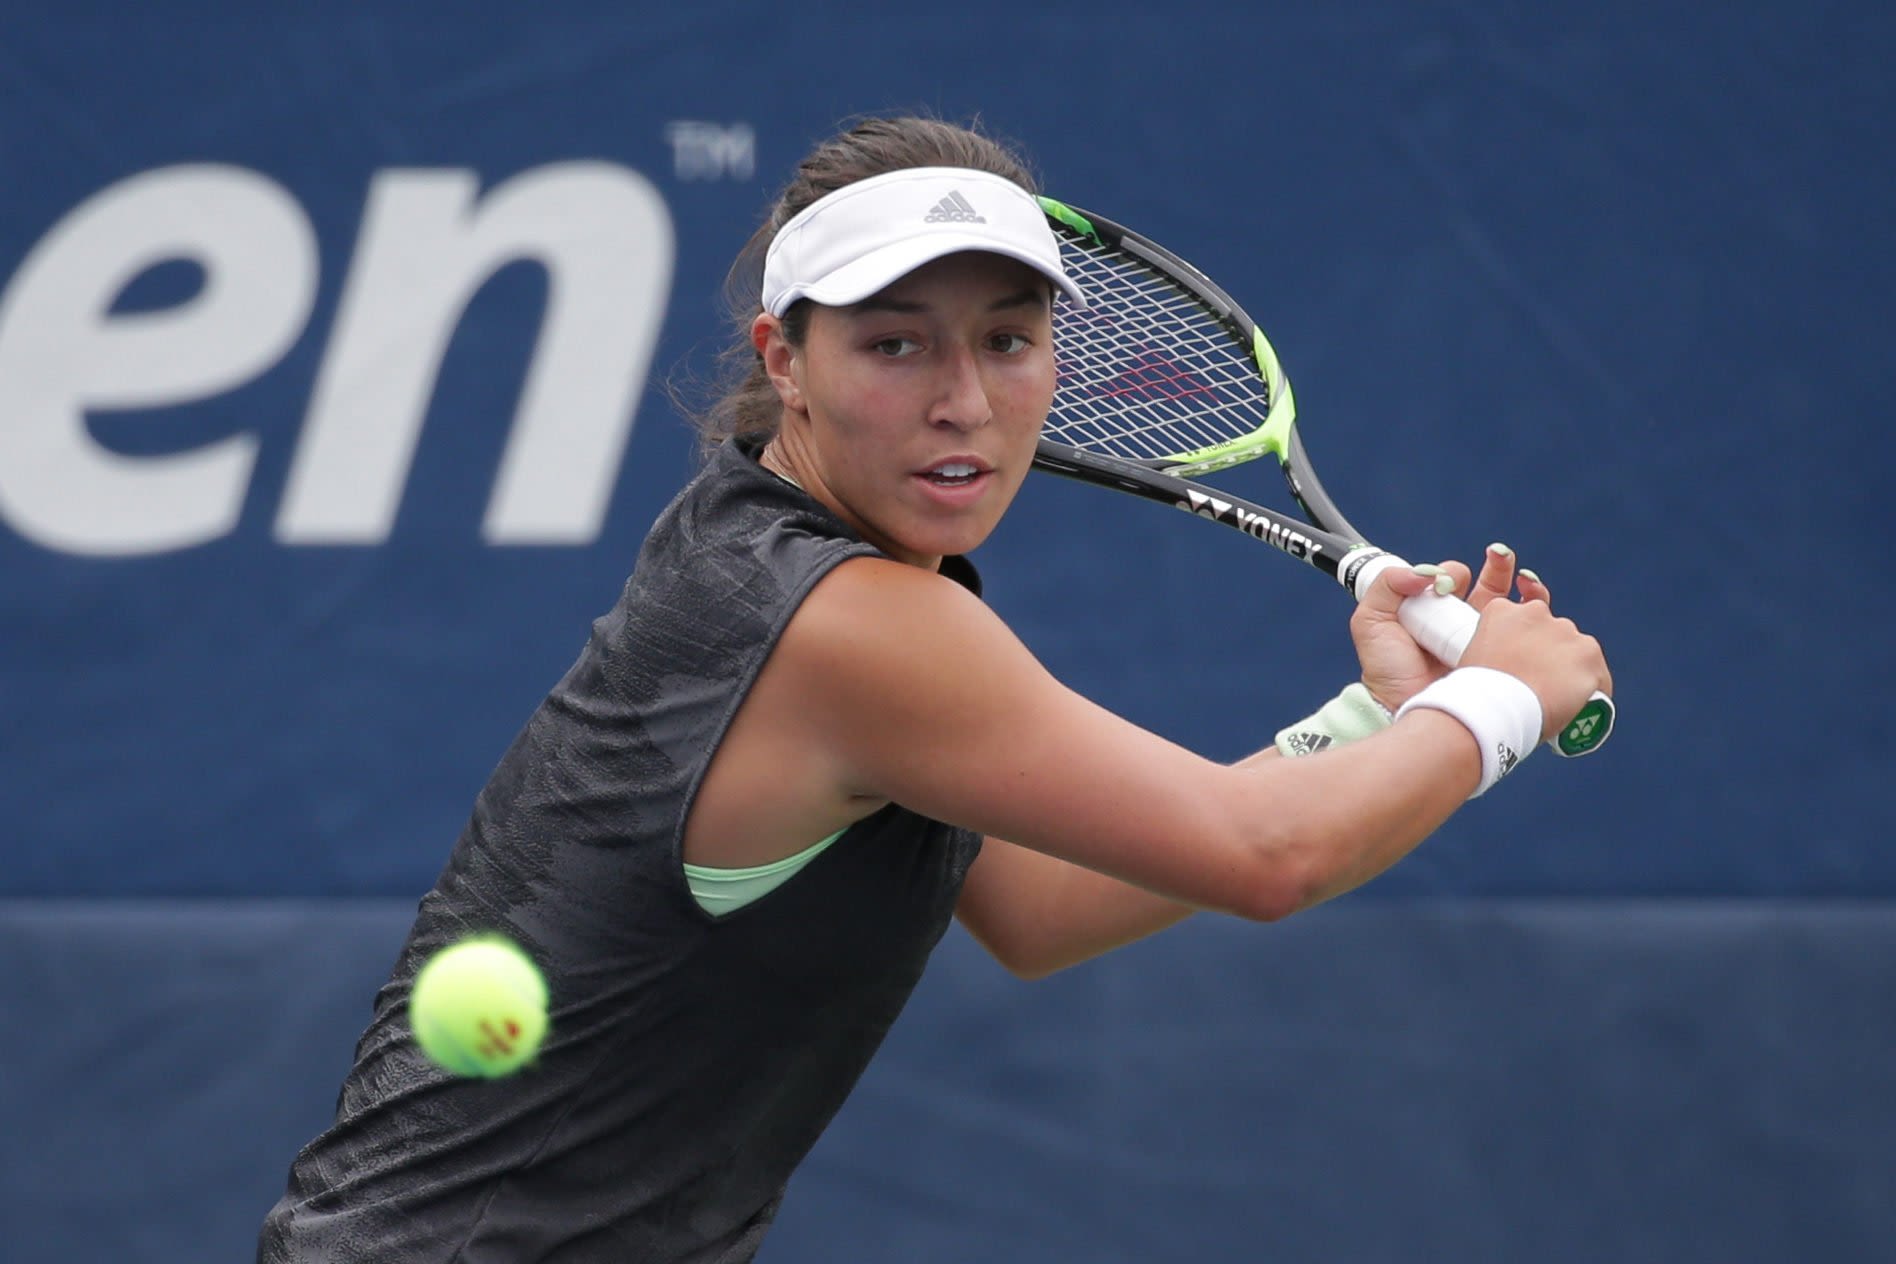 American No 2 Pegula out of French Open